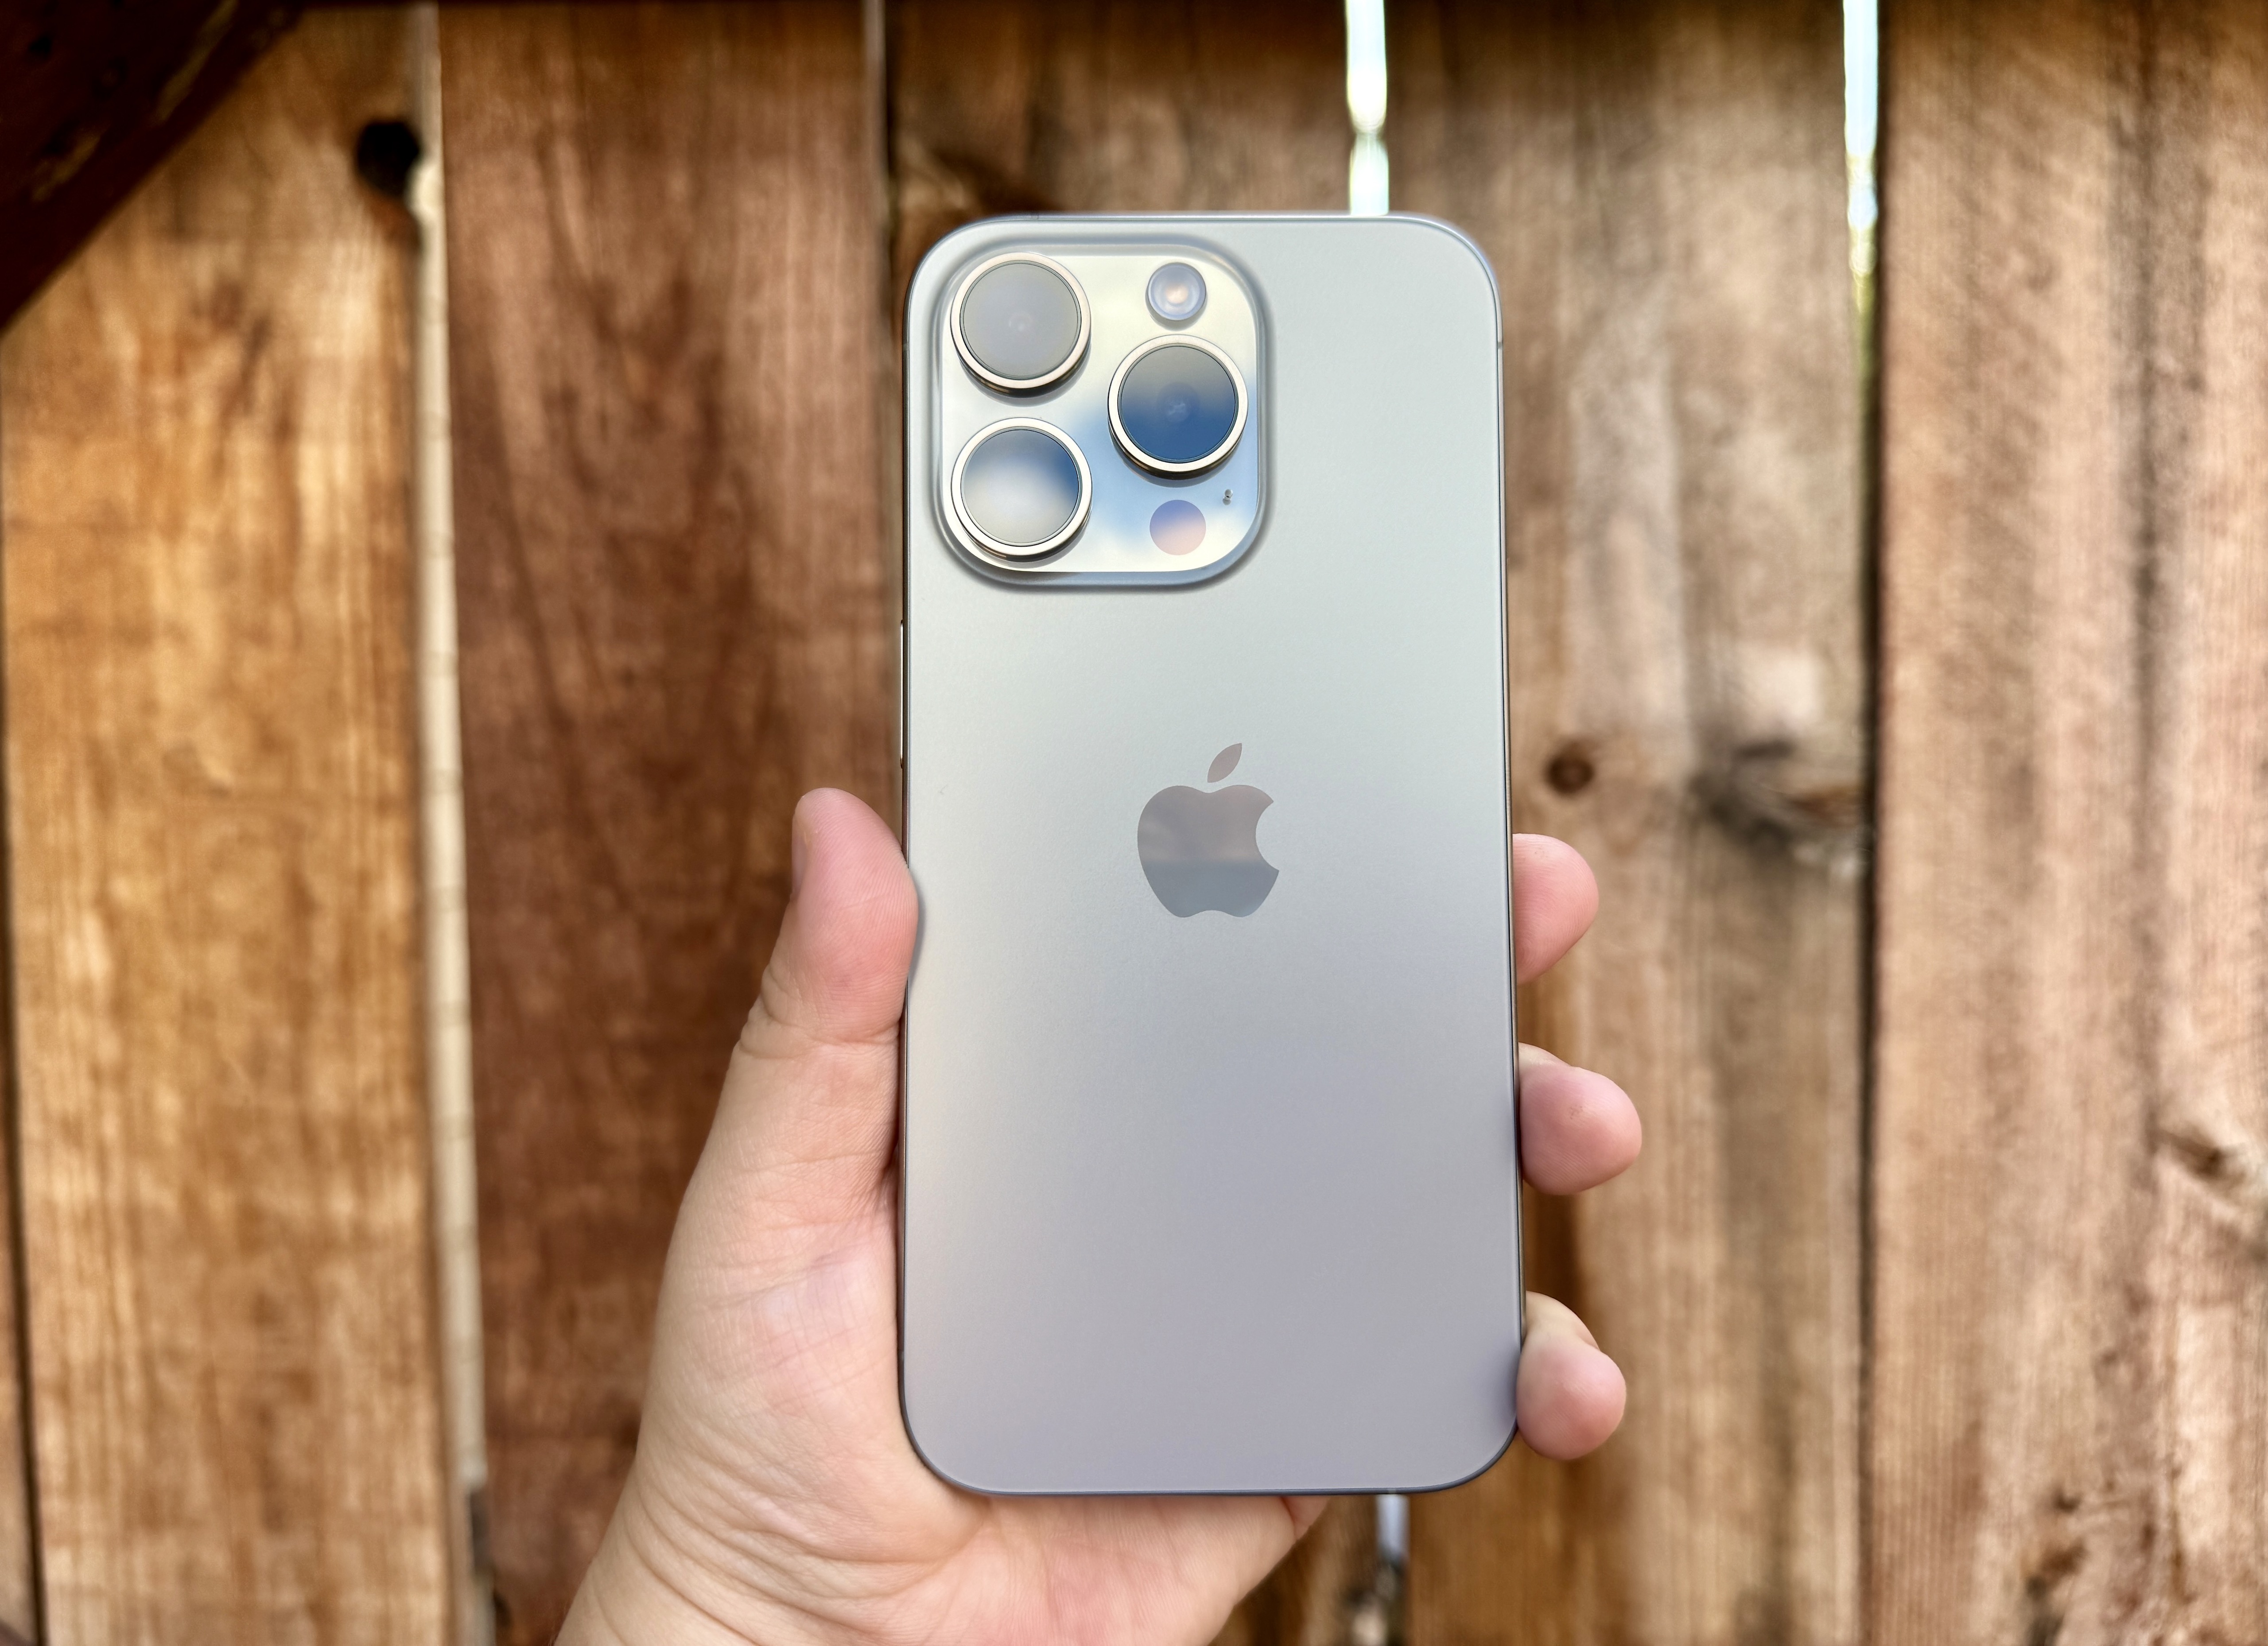 I get iPhone 15 Pro Max📱 Natural Titanium😍❤️, Video published by Leona